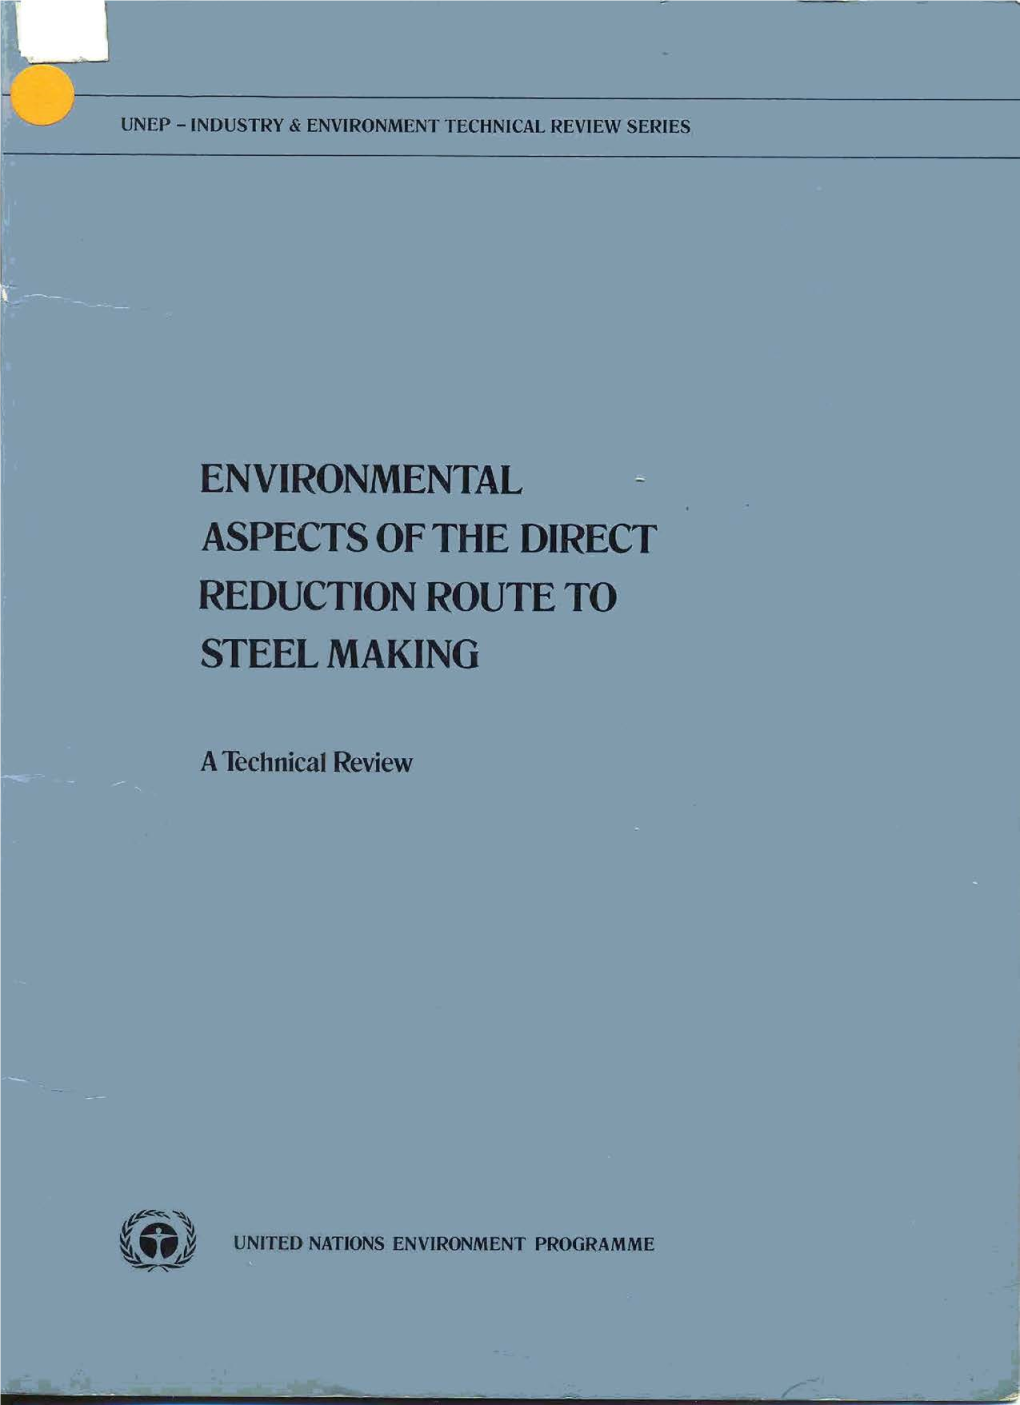 Environmental - Aspects of the Direct Reduction Route to Steel Making